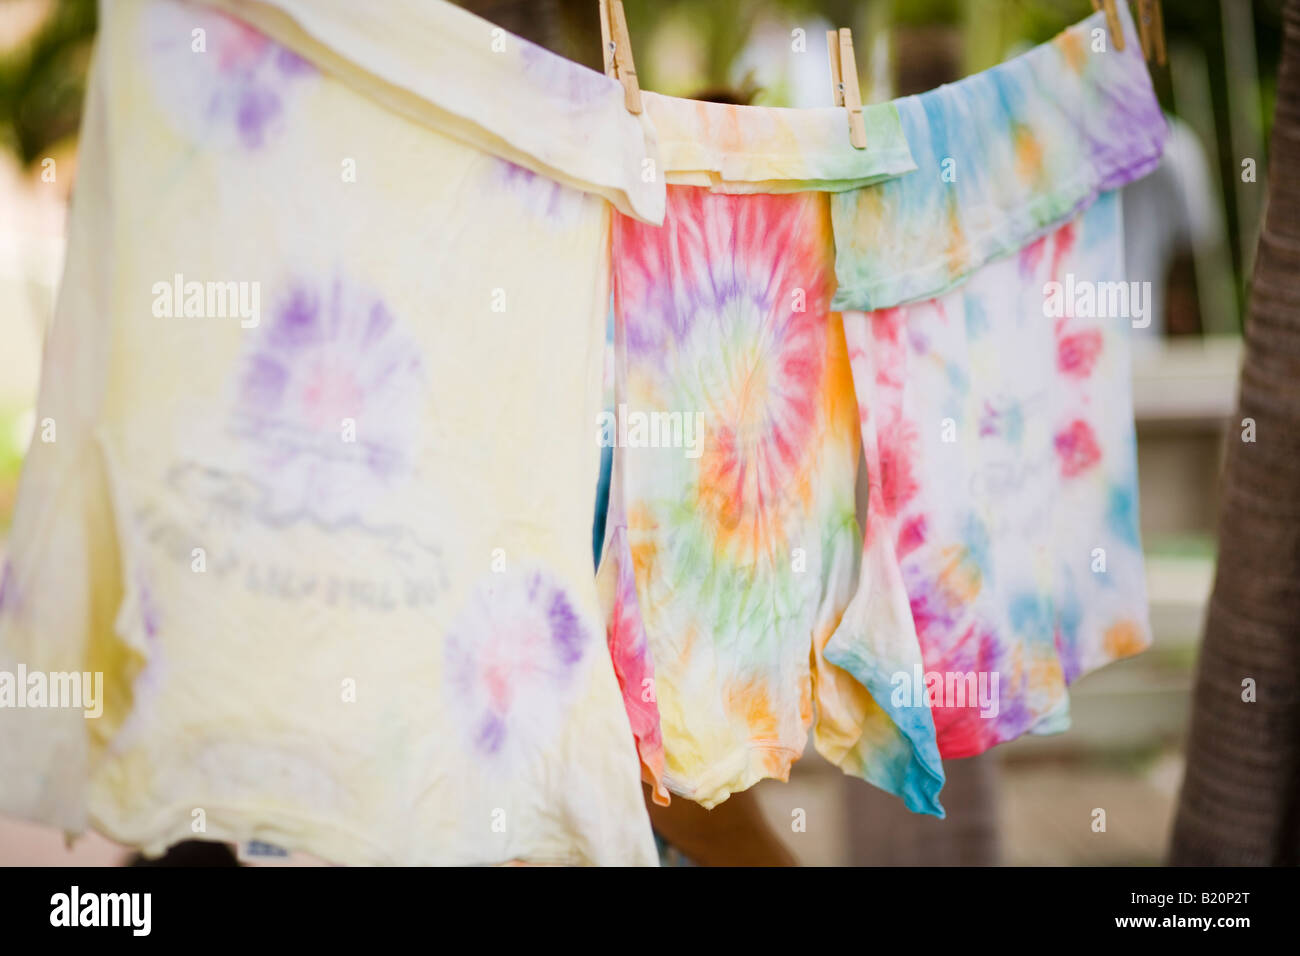 Tye dye t-shirts hanging on clothes line Banque D'Images